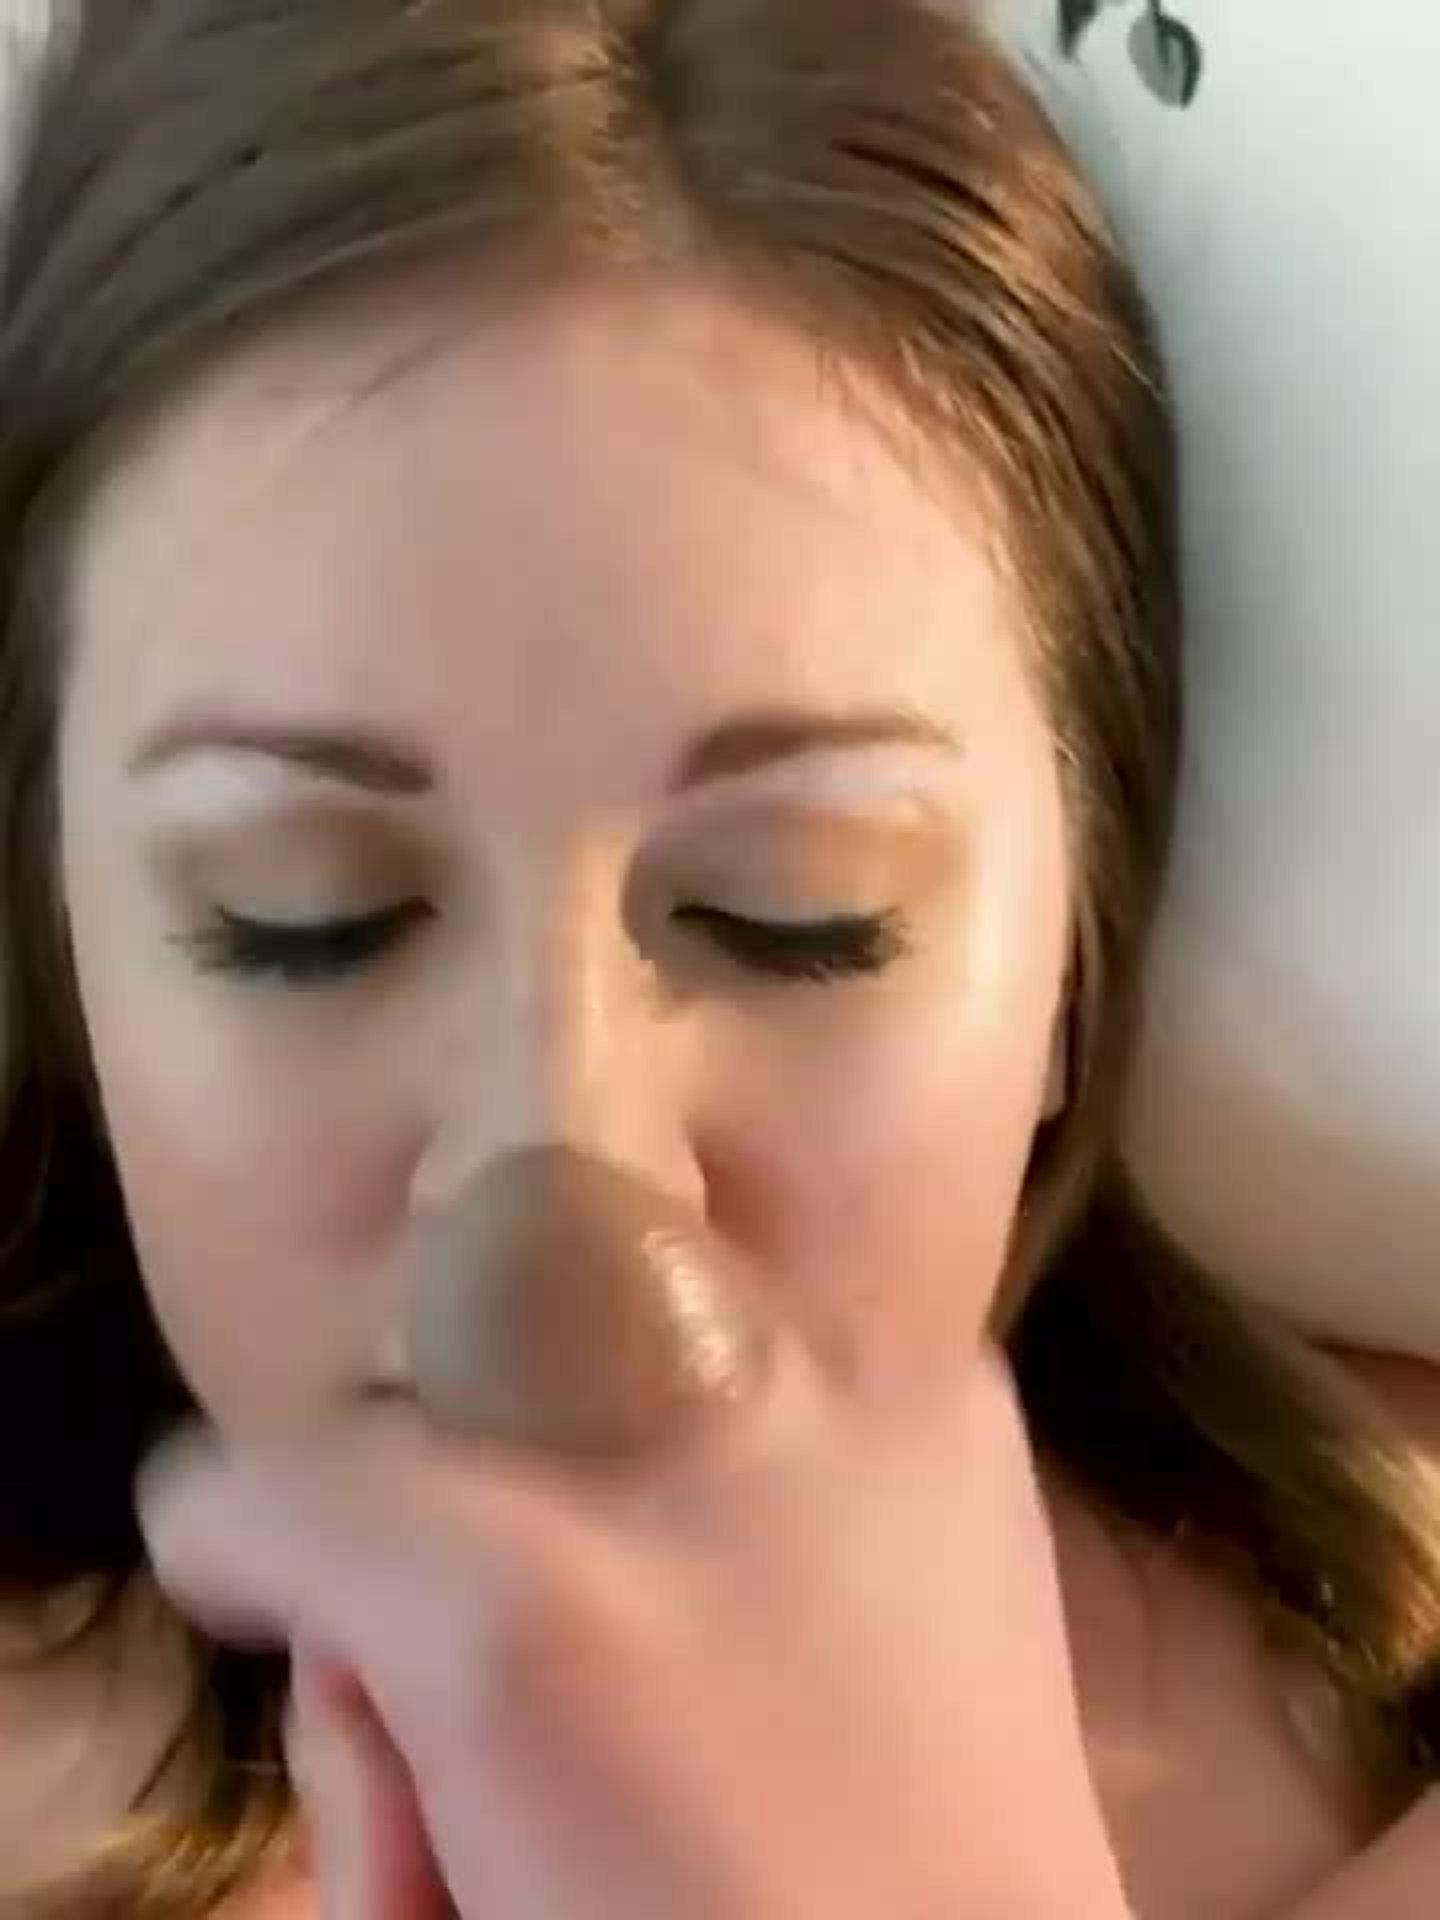 Watch the Video by PornLife with the username @pornlife994, posted on December 2, 2023. The post is about the topic Cum queens. and the text says 'Cum queen's face covered with thick cum load as her new makeup 💦💦💦'